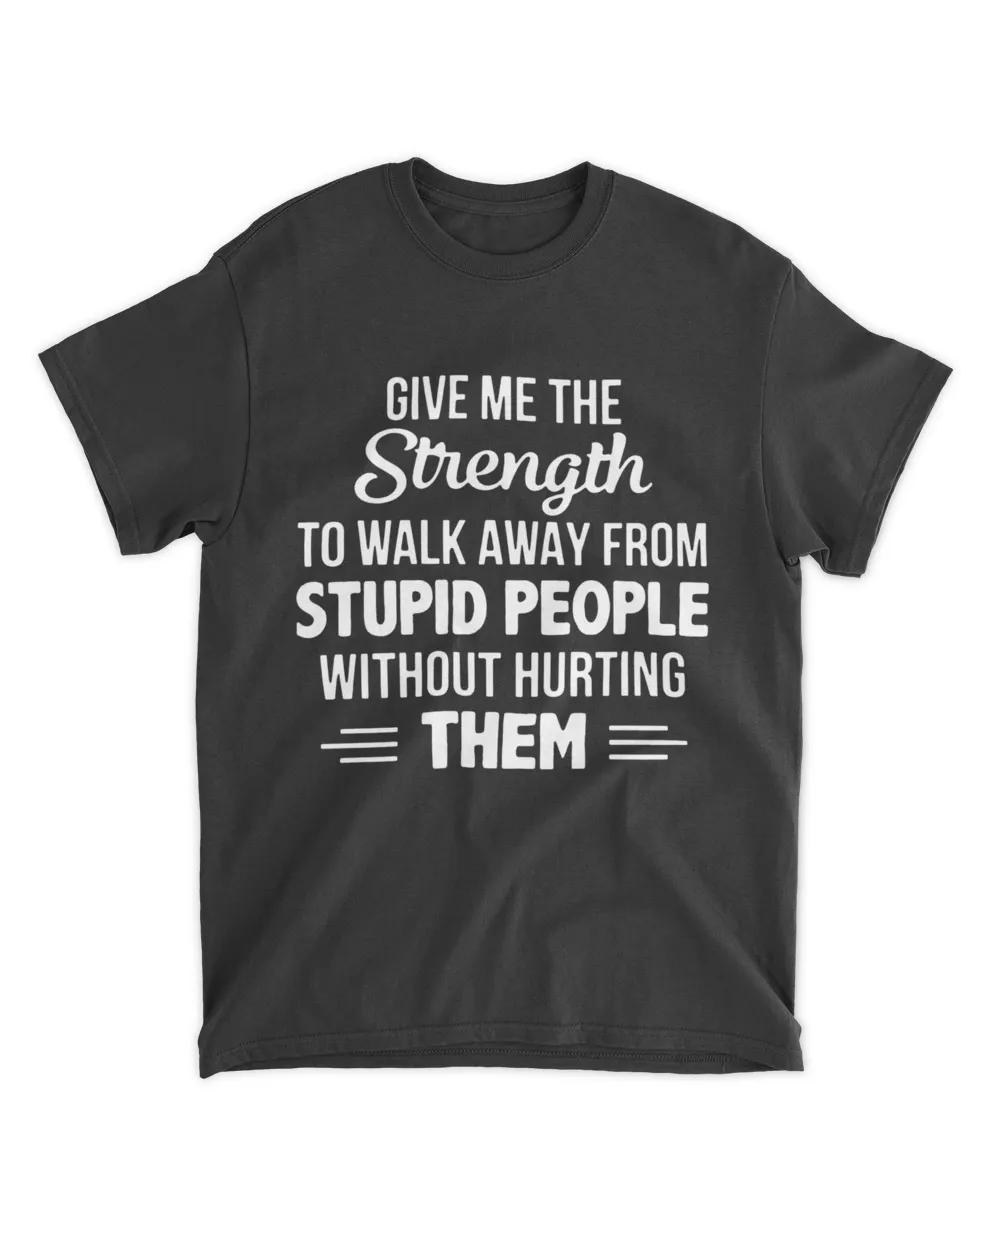 Give Me The Strength To Walk Away From Stupid People Without Hurting Them Shirt